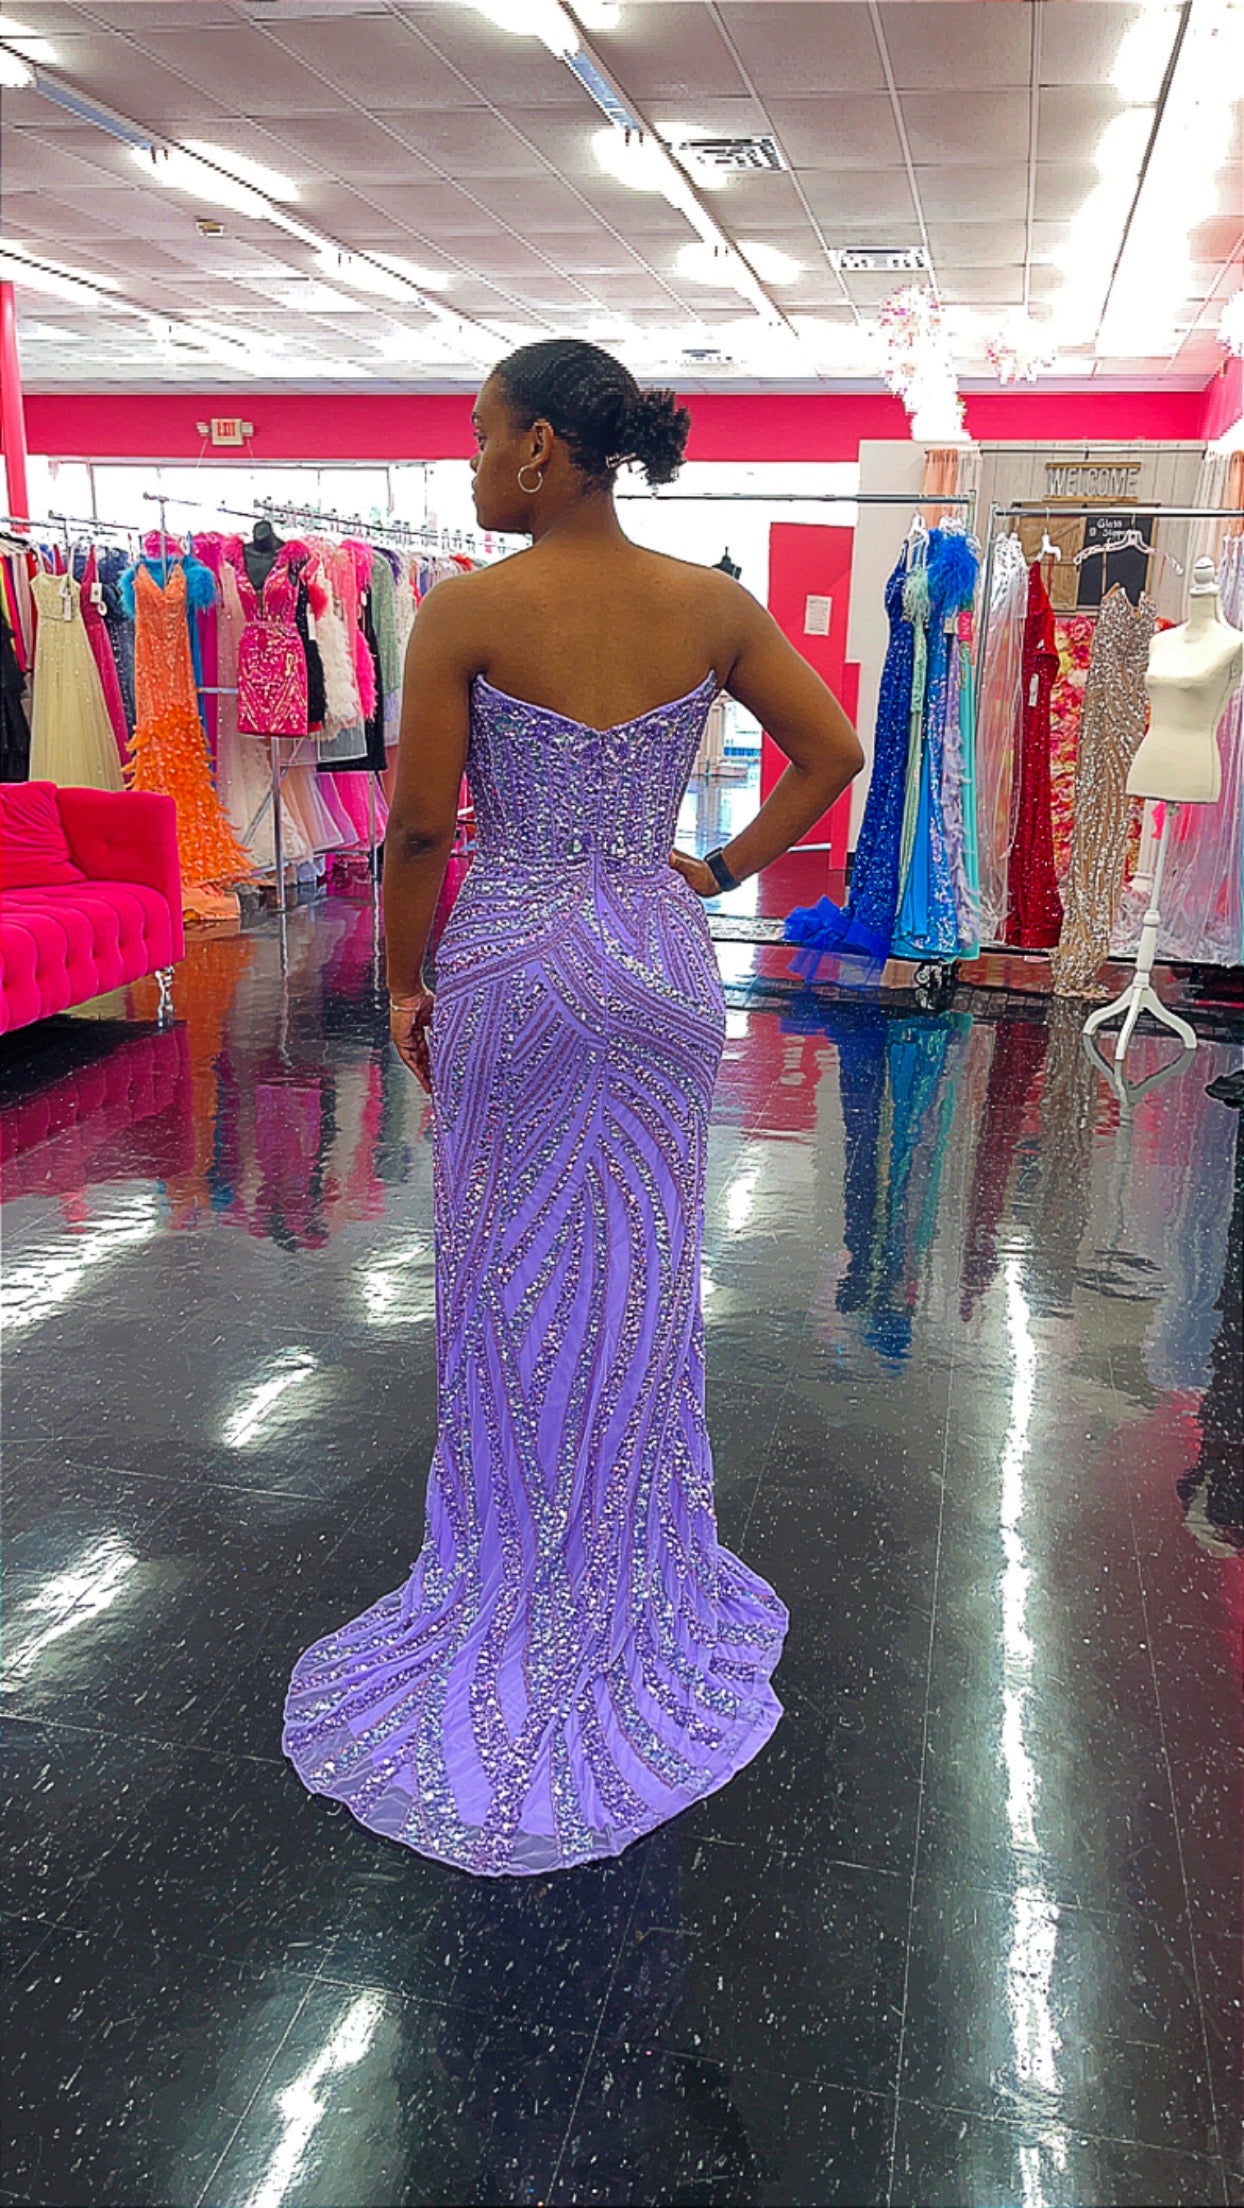 Ashley Lauren 11236 Long Fitted V Neck Slit Beaded Sequin Prom Dress Pageant Gown This strapless gown is sure to turn heads. The sweetheart neckline is complete with a modern floral sequin motif that continues down the bustier and skirt. The skirt is complete with a left leg slit. Strapless Bustier Left Leg Slit Fully Hand Beaded Colors: Lilac, Sky/Nude, Gold/Black, Blue/Jade, Silver/Ivory, Gold, Silver/Nude, Red, Bright Pink, Gold/Ivory, Rose Gold